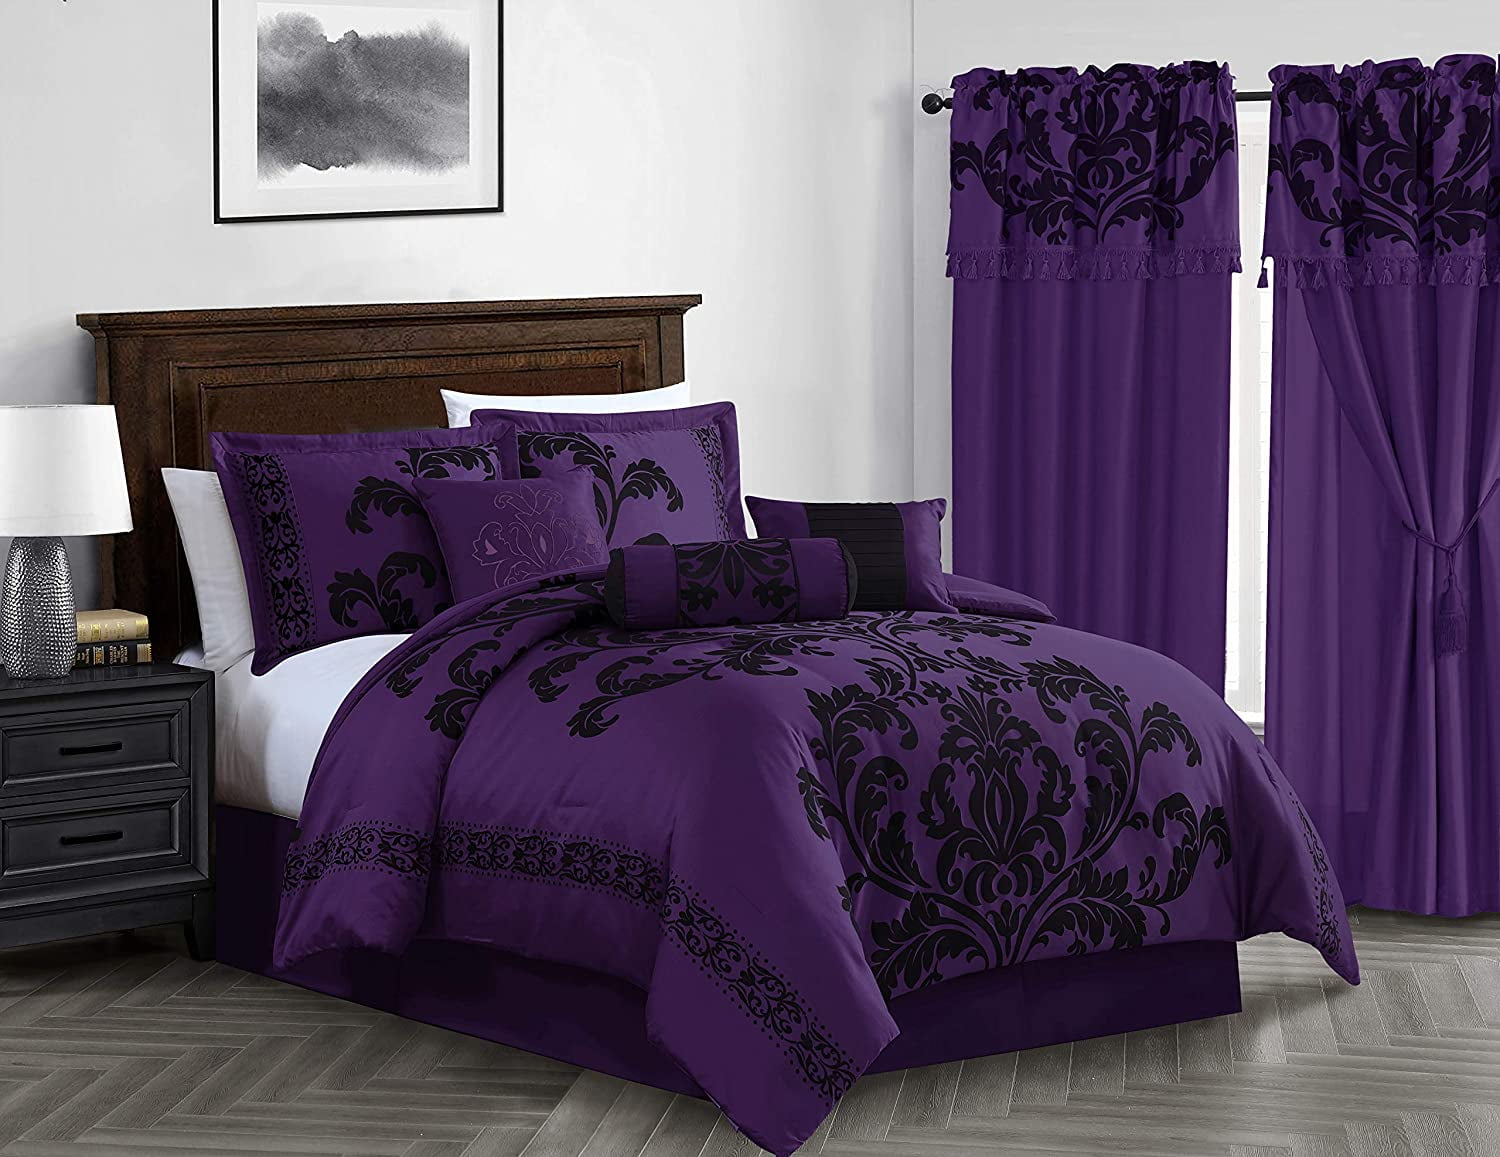 Queen Details about   Chezmoi Collection 7-Piece Jacquard Floral Comforter Set Bed-in-a-Bag Set 